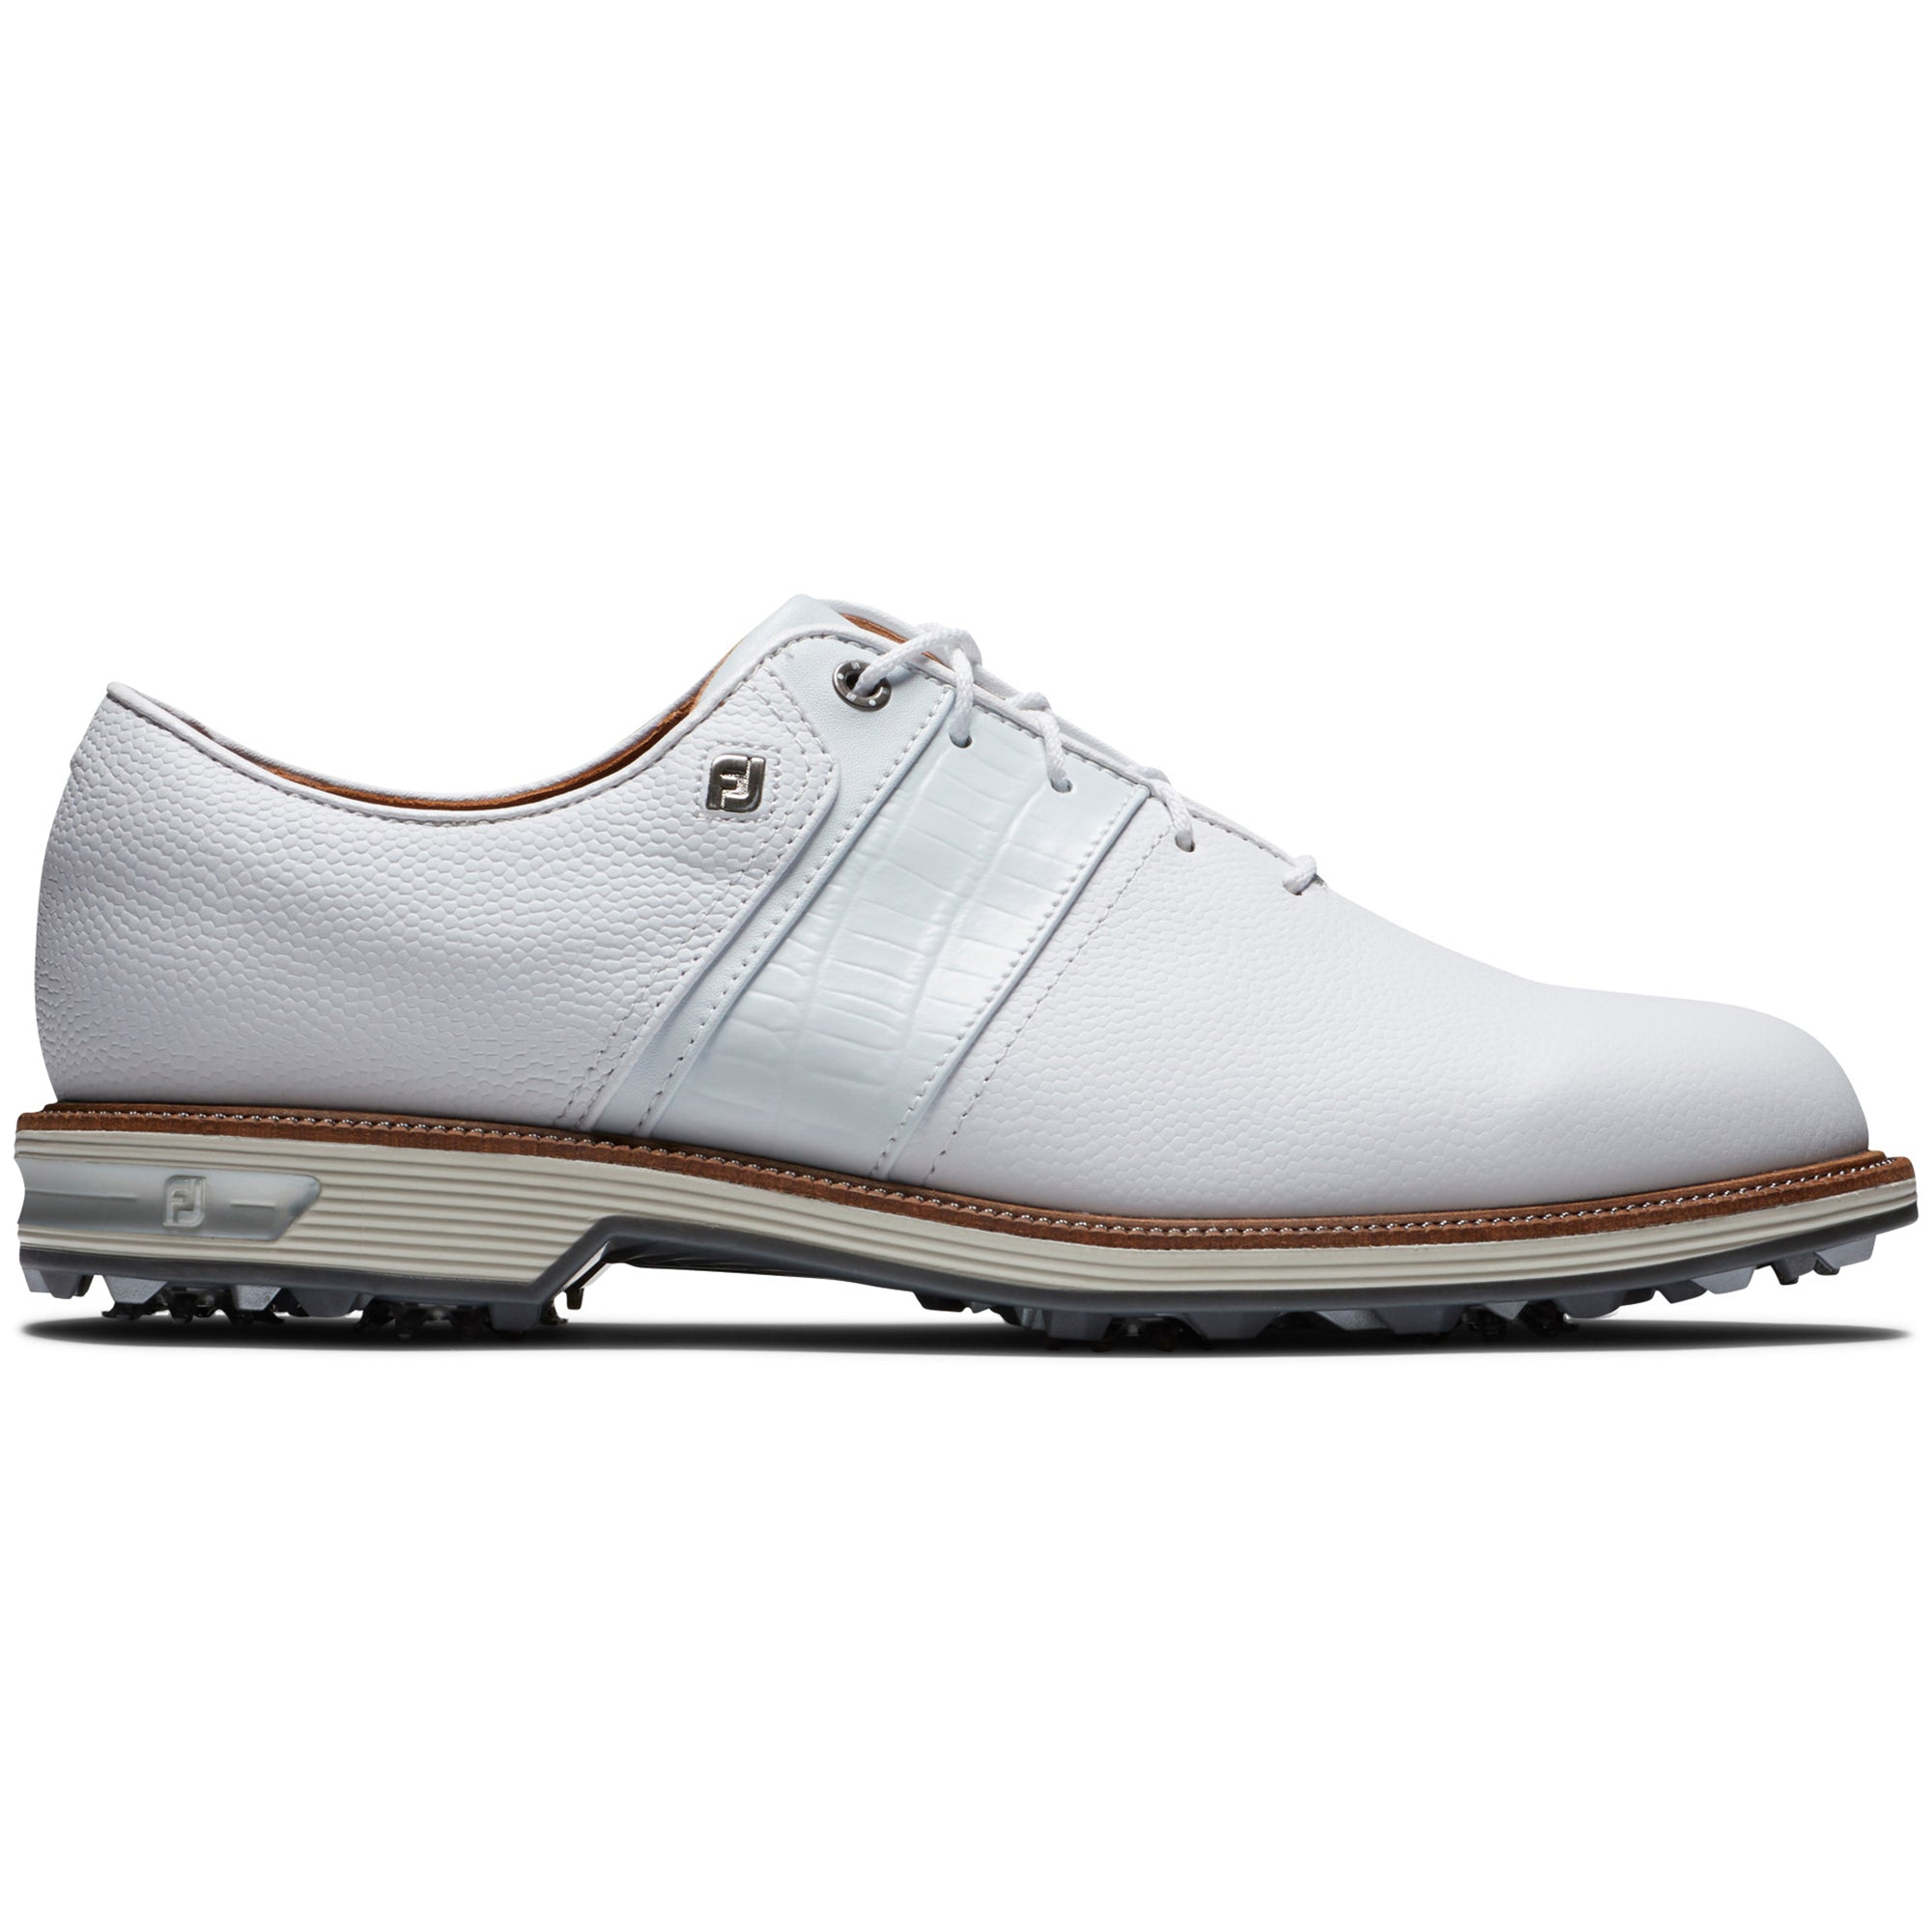 FootJoy Premiere Series Packard Golf Shoes White | Function18